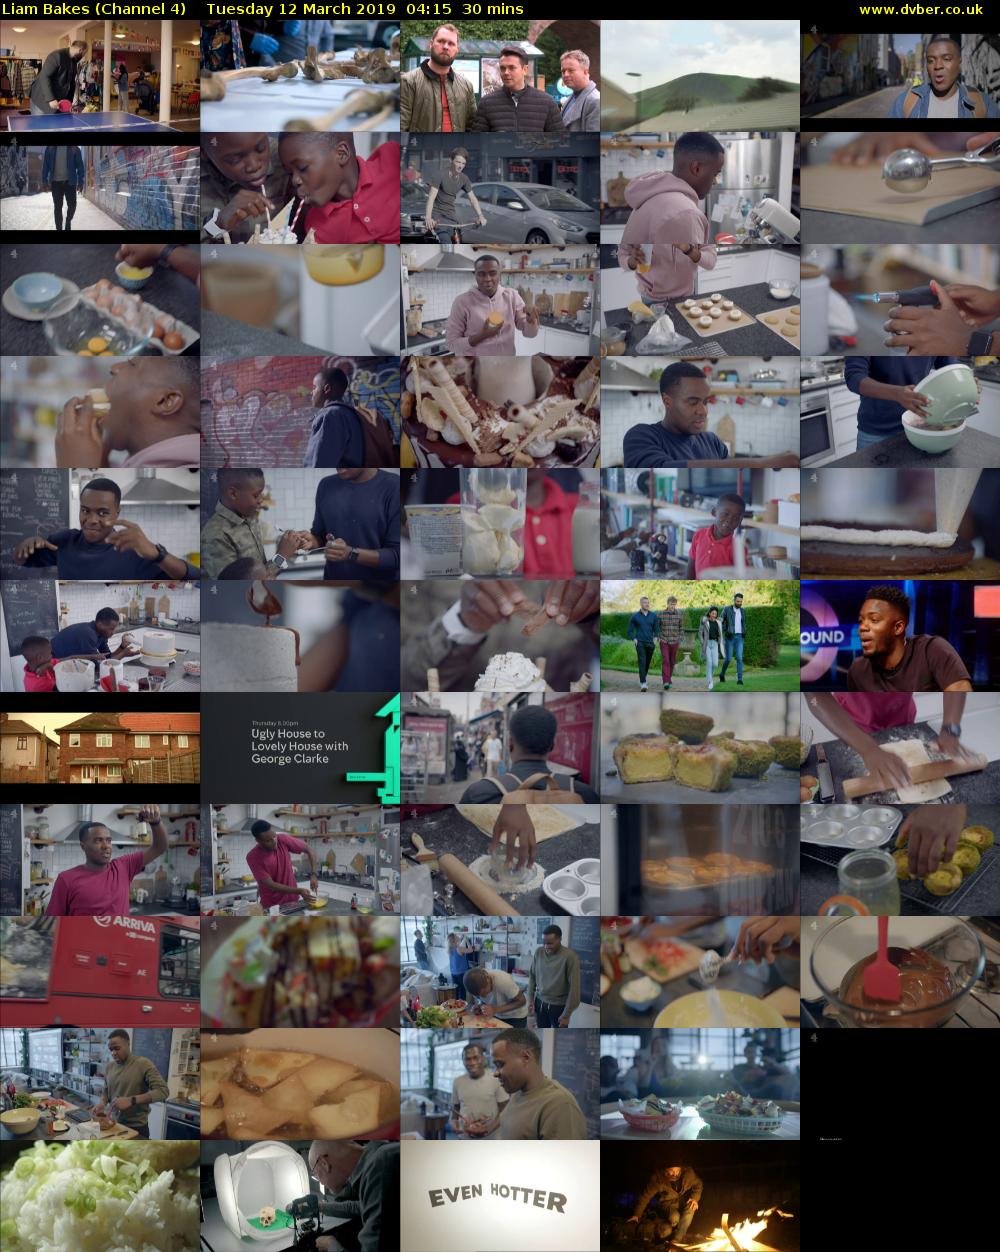 Liam Bakes (Channel 4) Tuesday 12 March 2019 04:15 - 04:45